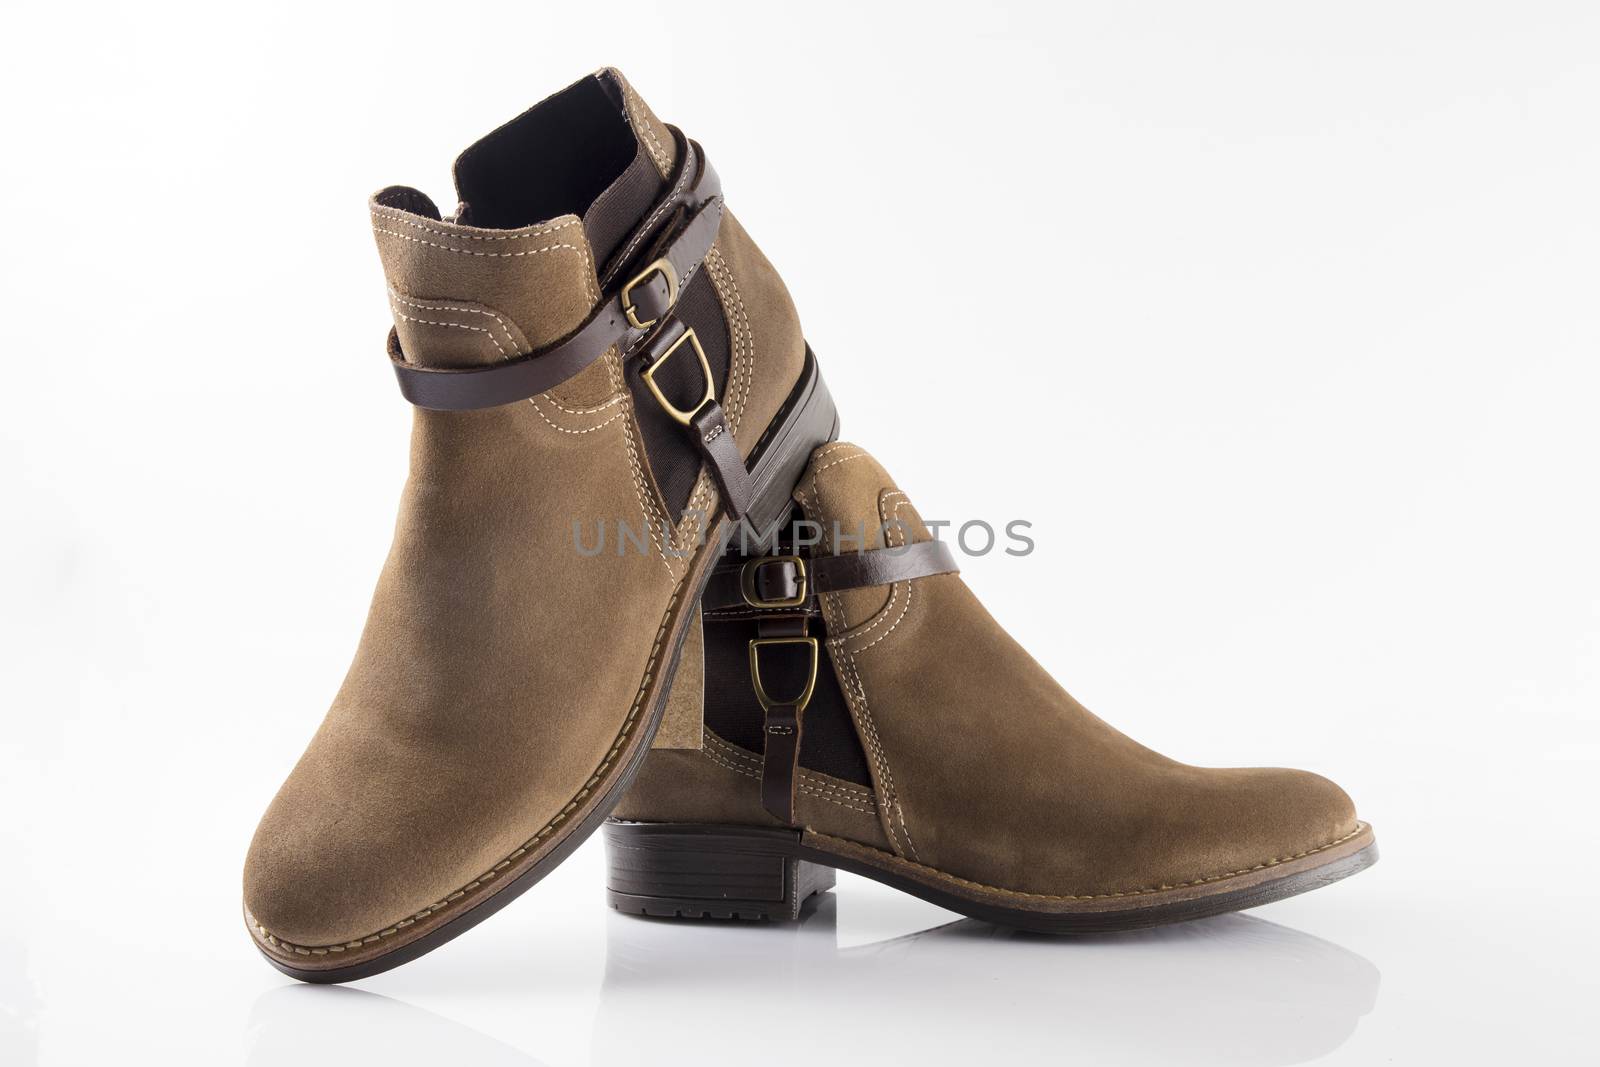 Female brown leather boot on white background, isolated product, top view.